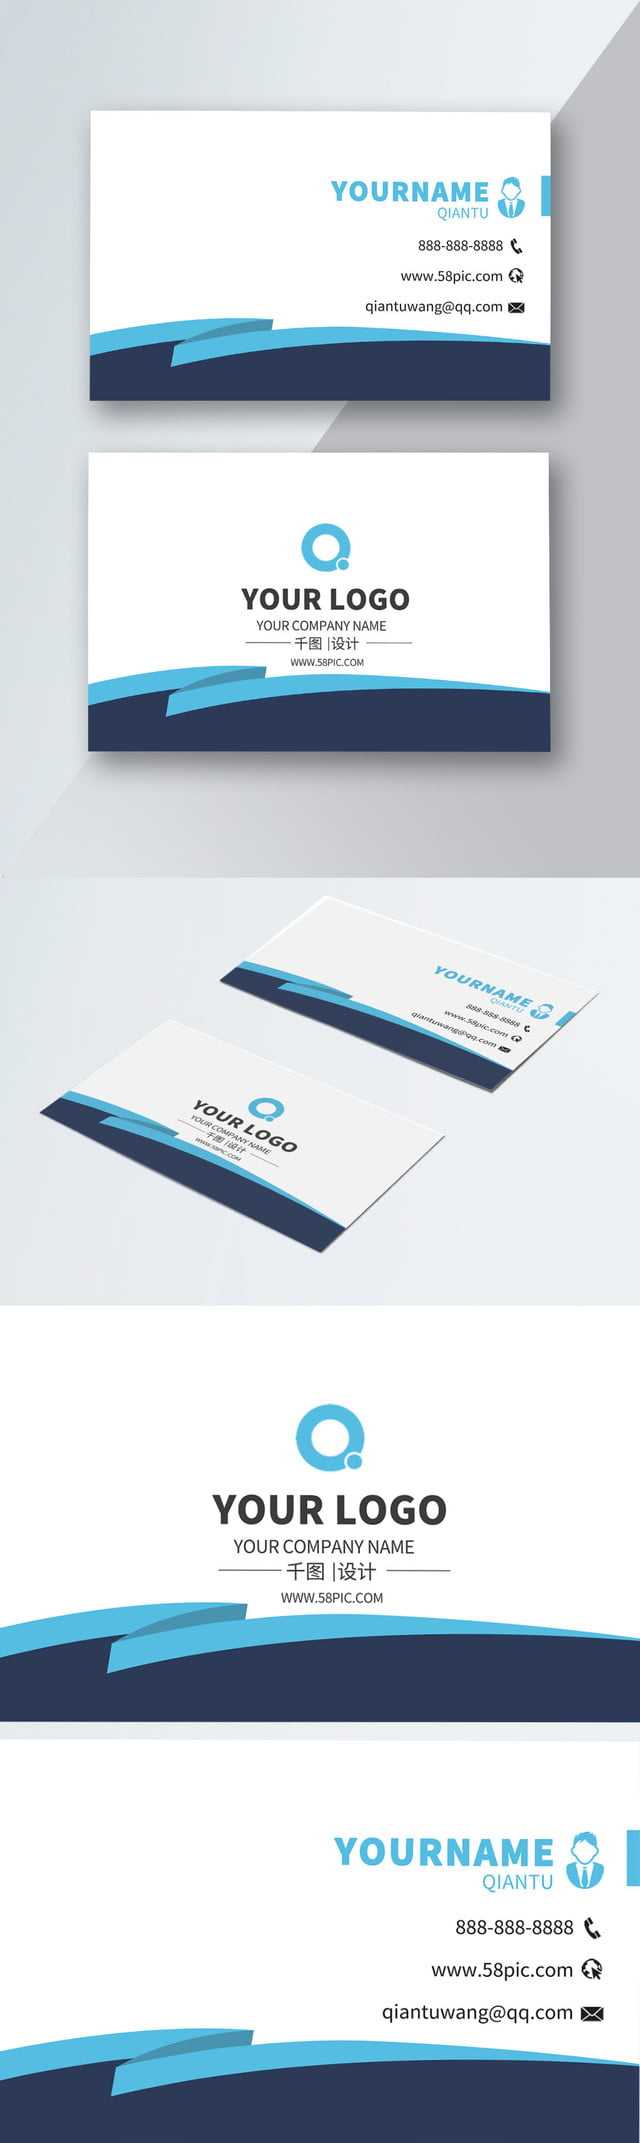 Advertising Company Business Card Material Download Pertaining To Advertising Card Template